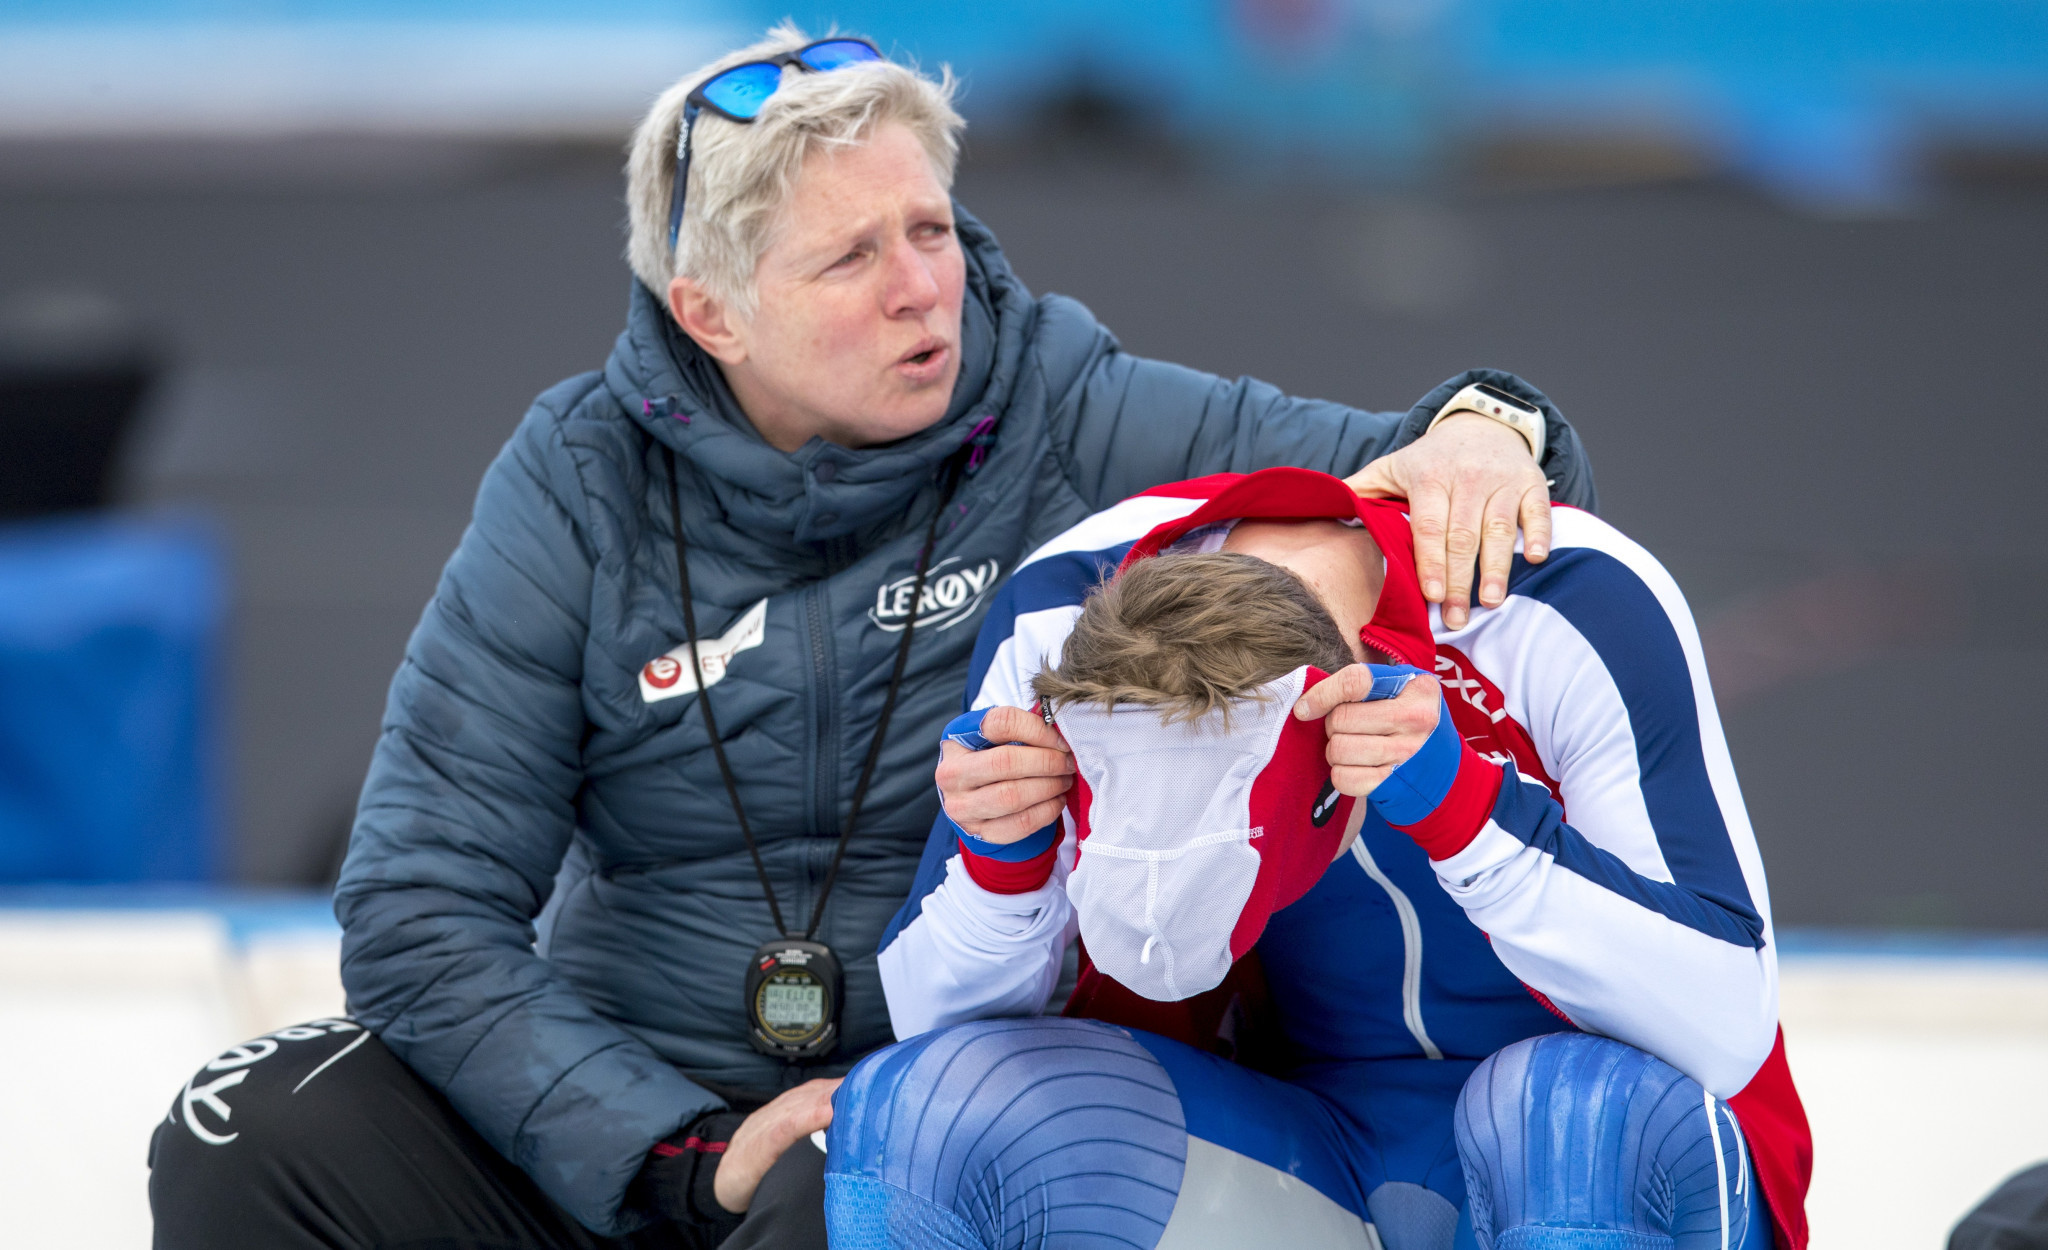 Sverre Lunde Pedersen is consoled after his fall had cost him the opportunity of becoming first Norwegian to win the World Allround Speed Skating champion for 24 years ©Getty Images